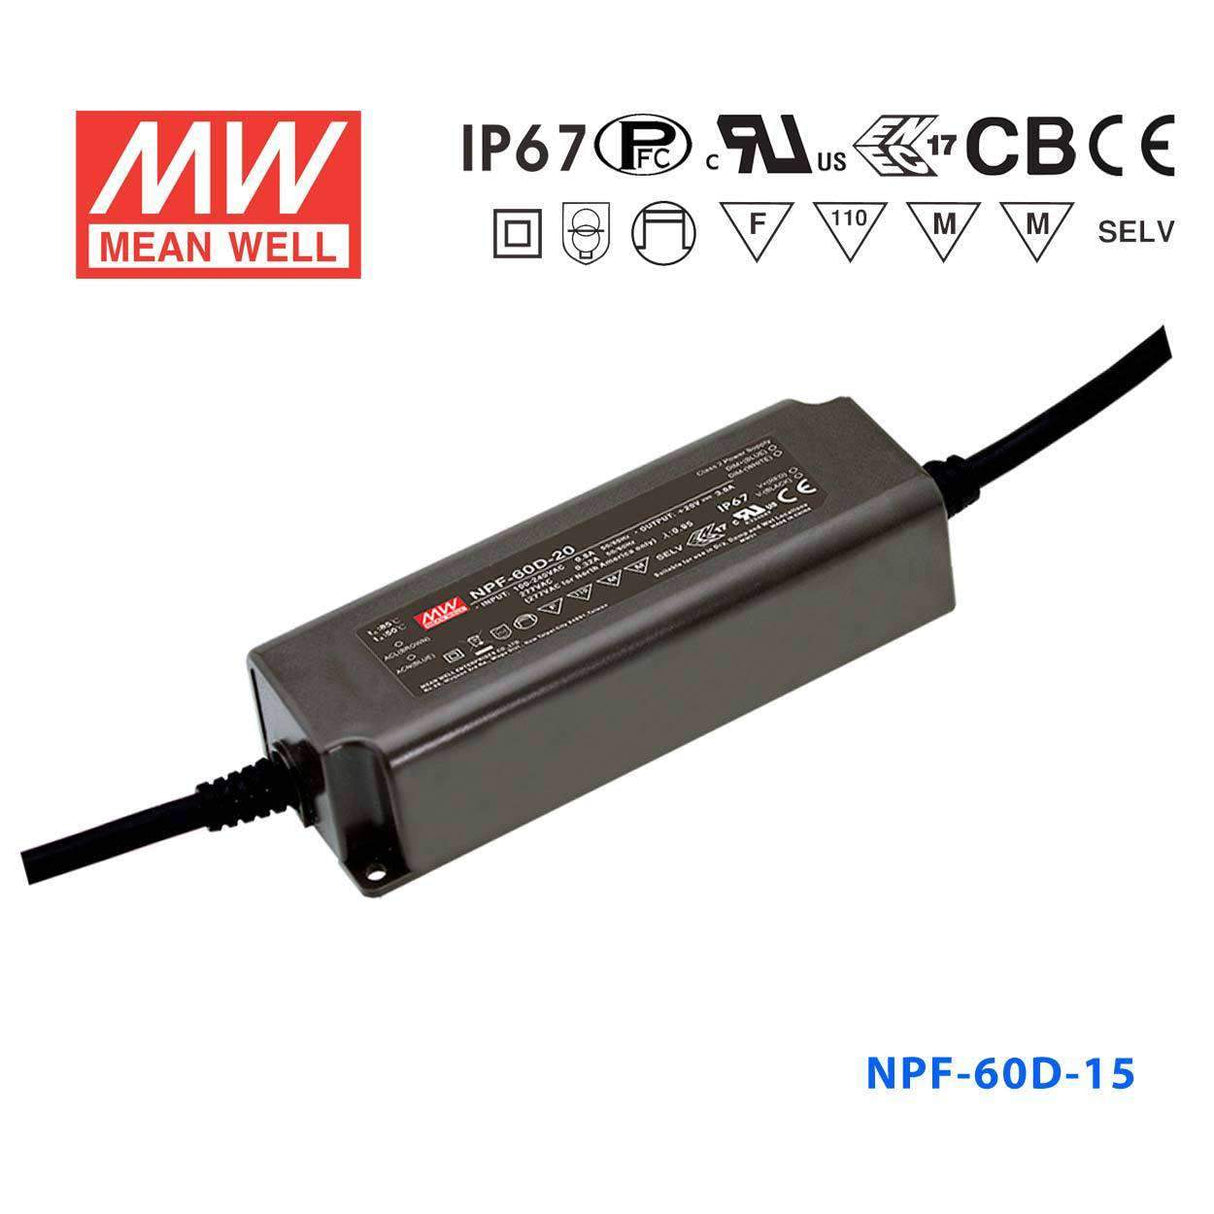 Mean Well NPF-60D-15 Power Supply 60W 15V - Dimmable